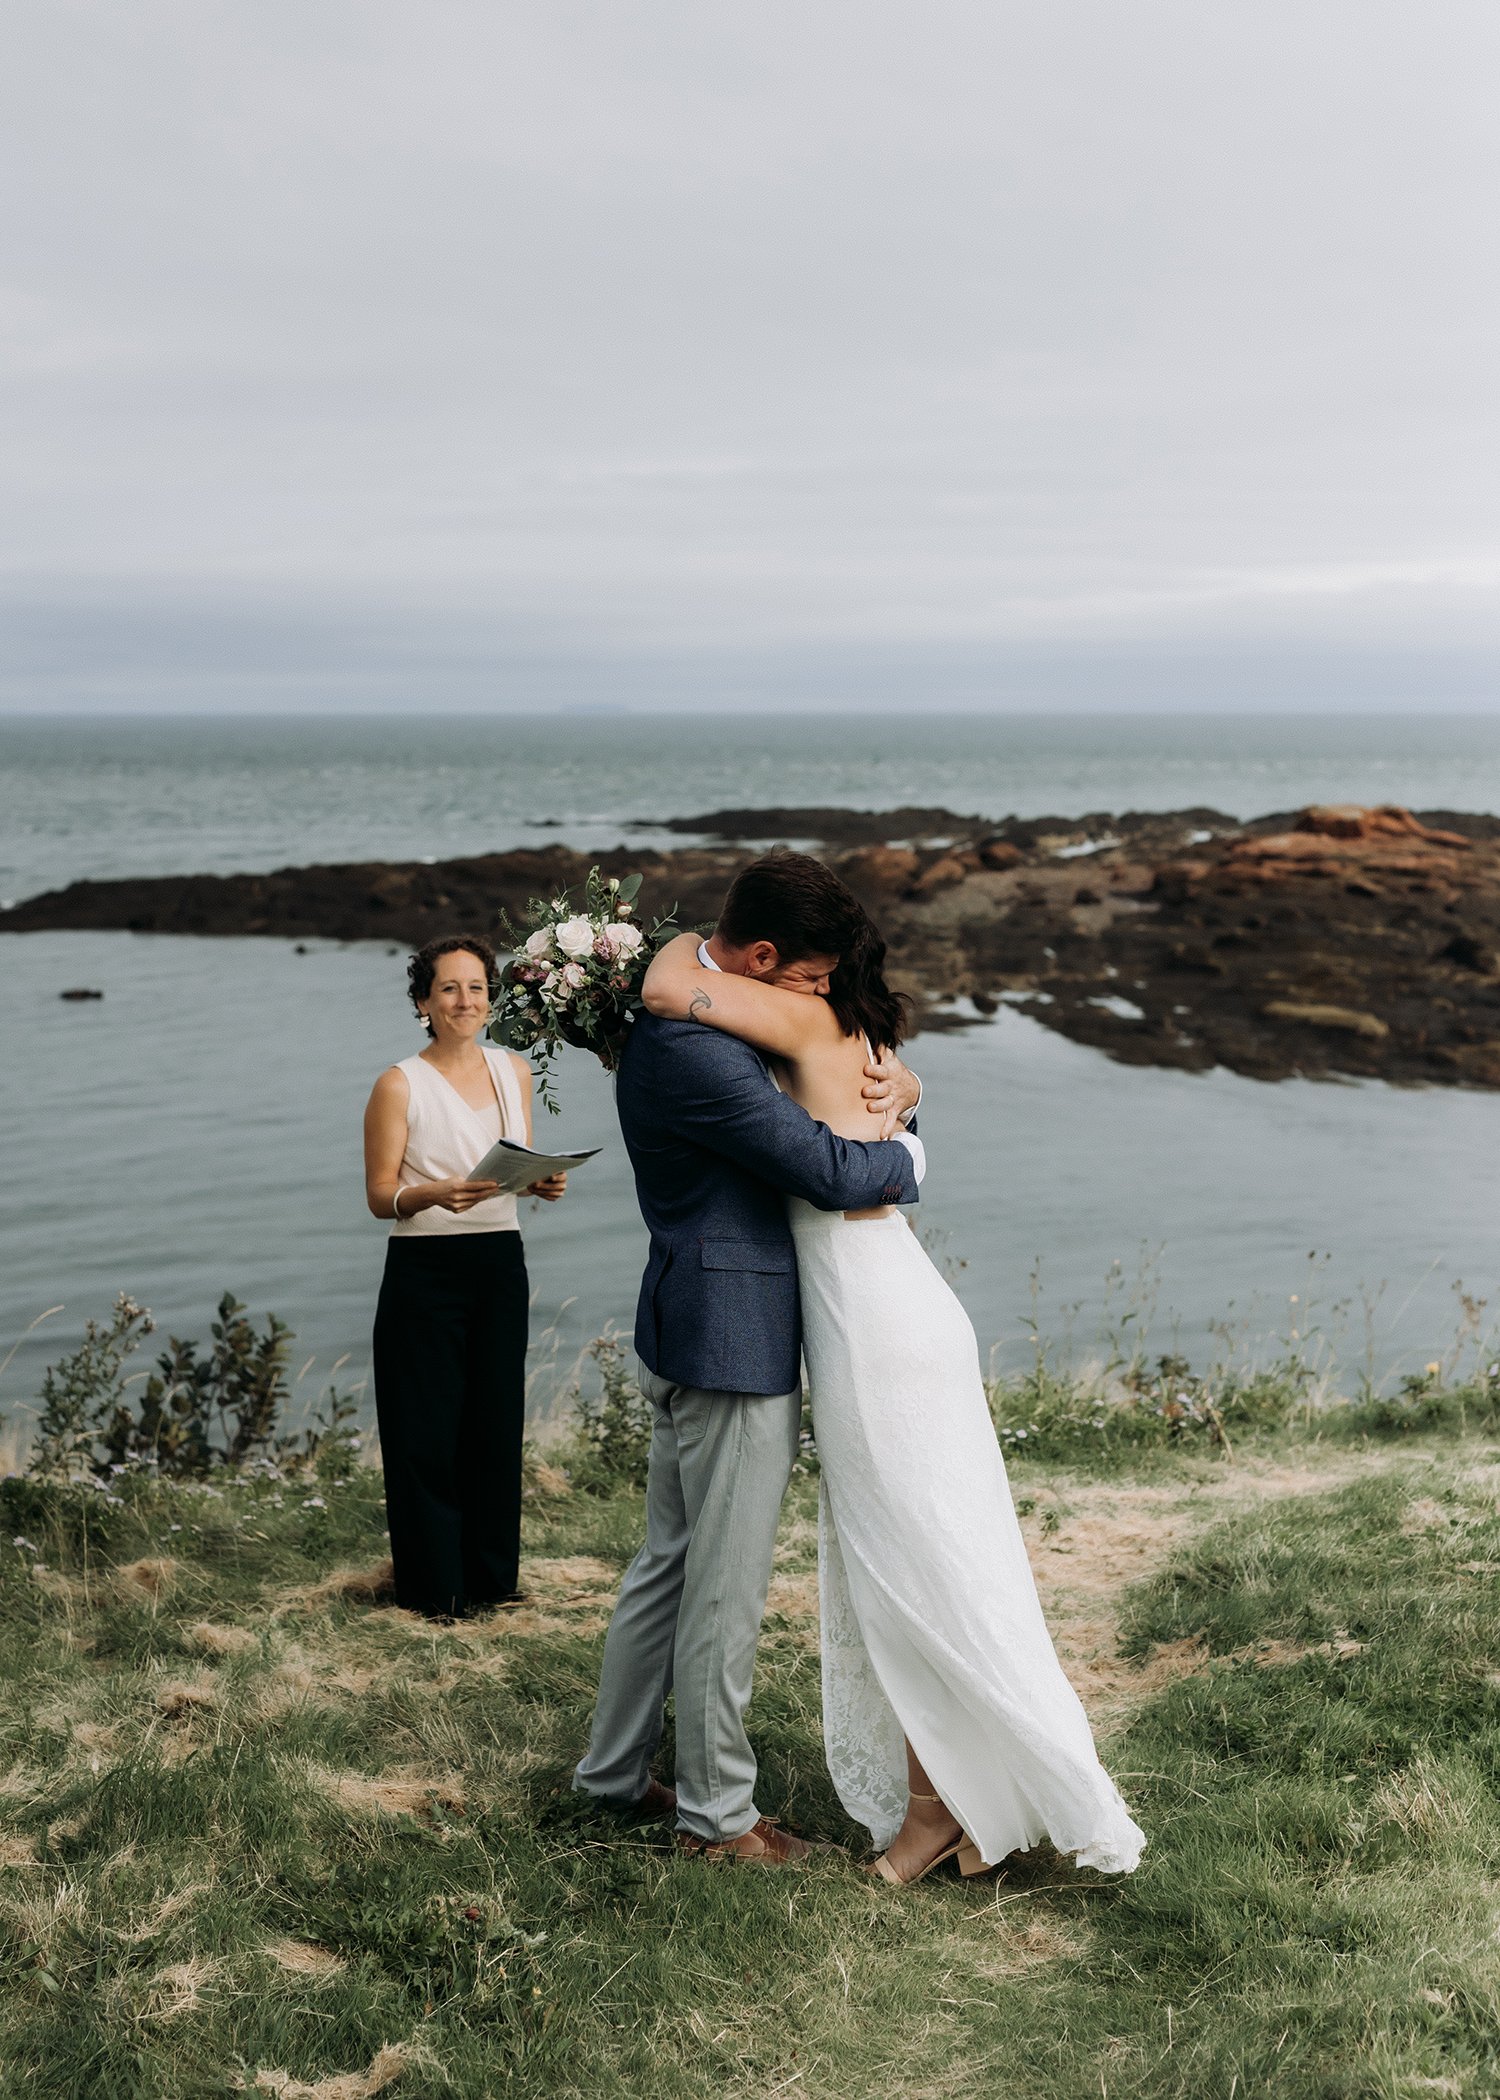 St Martins New Brunswick Elopement by Shannon-May Photography 010.jpg